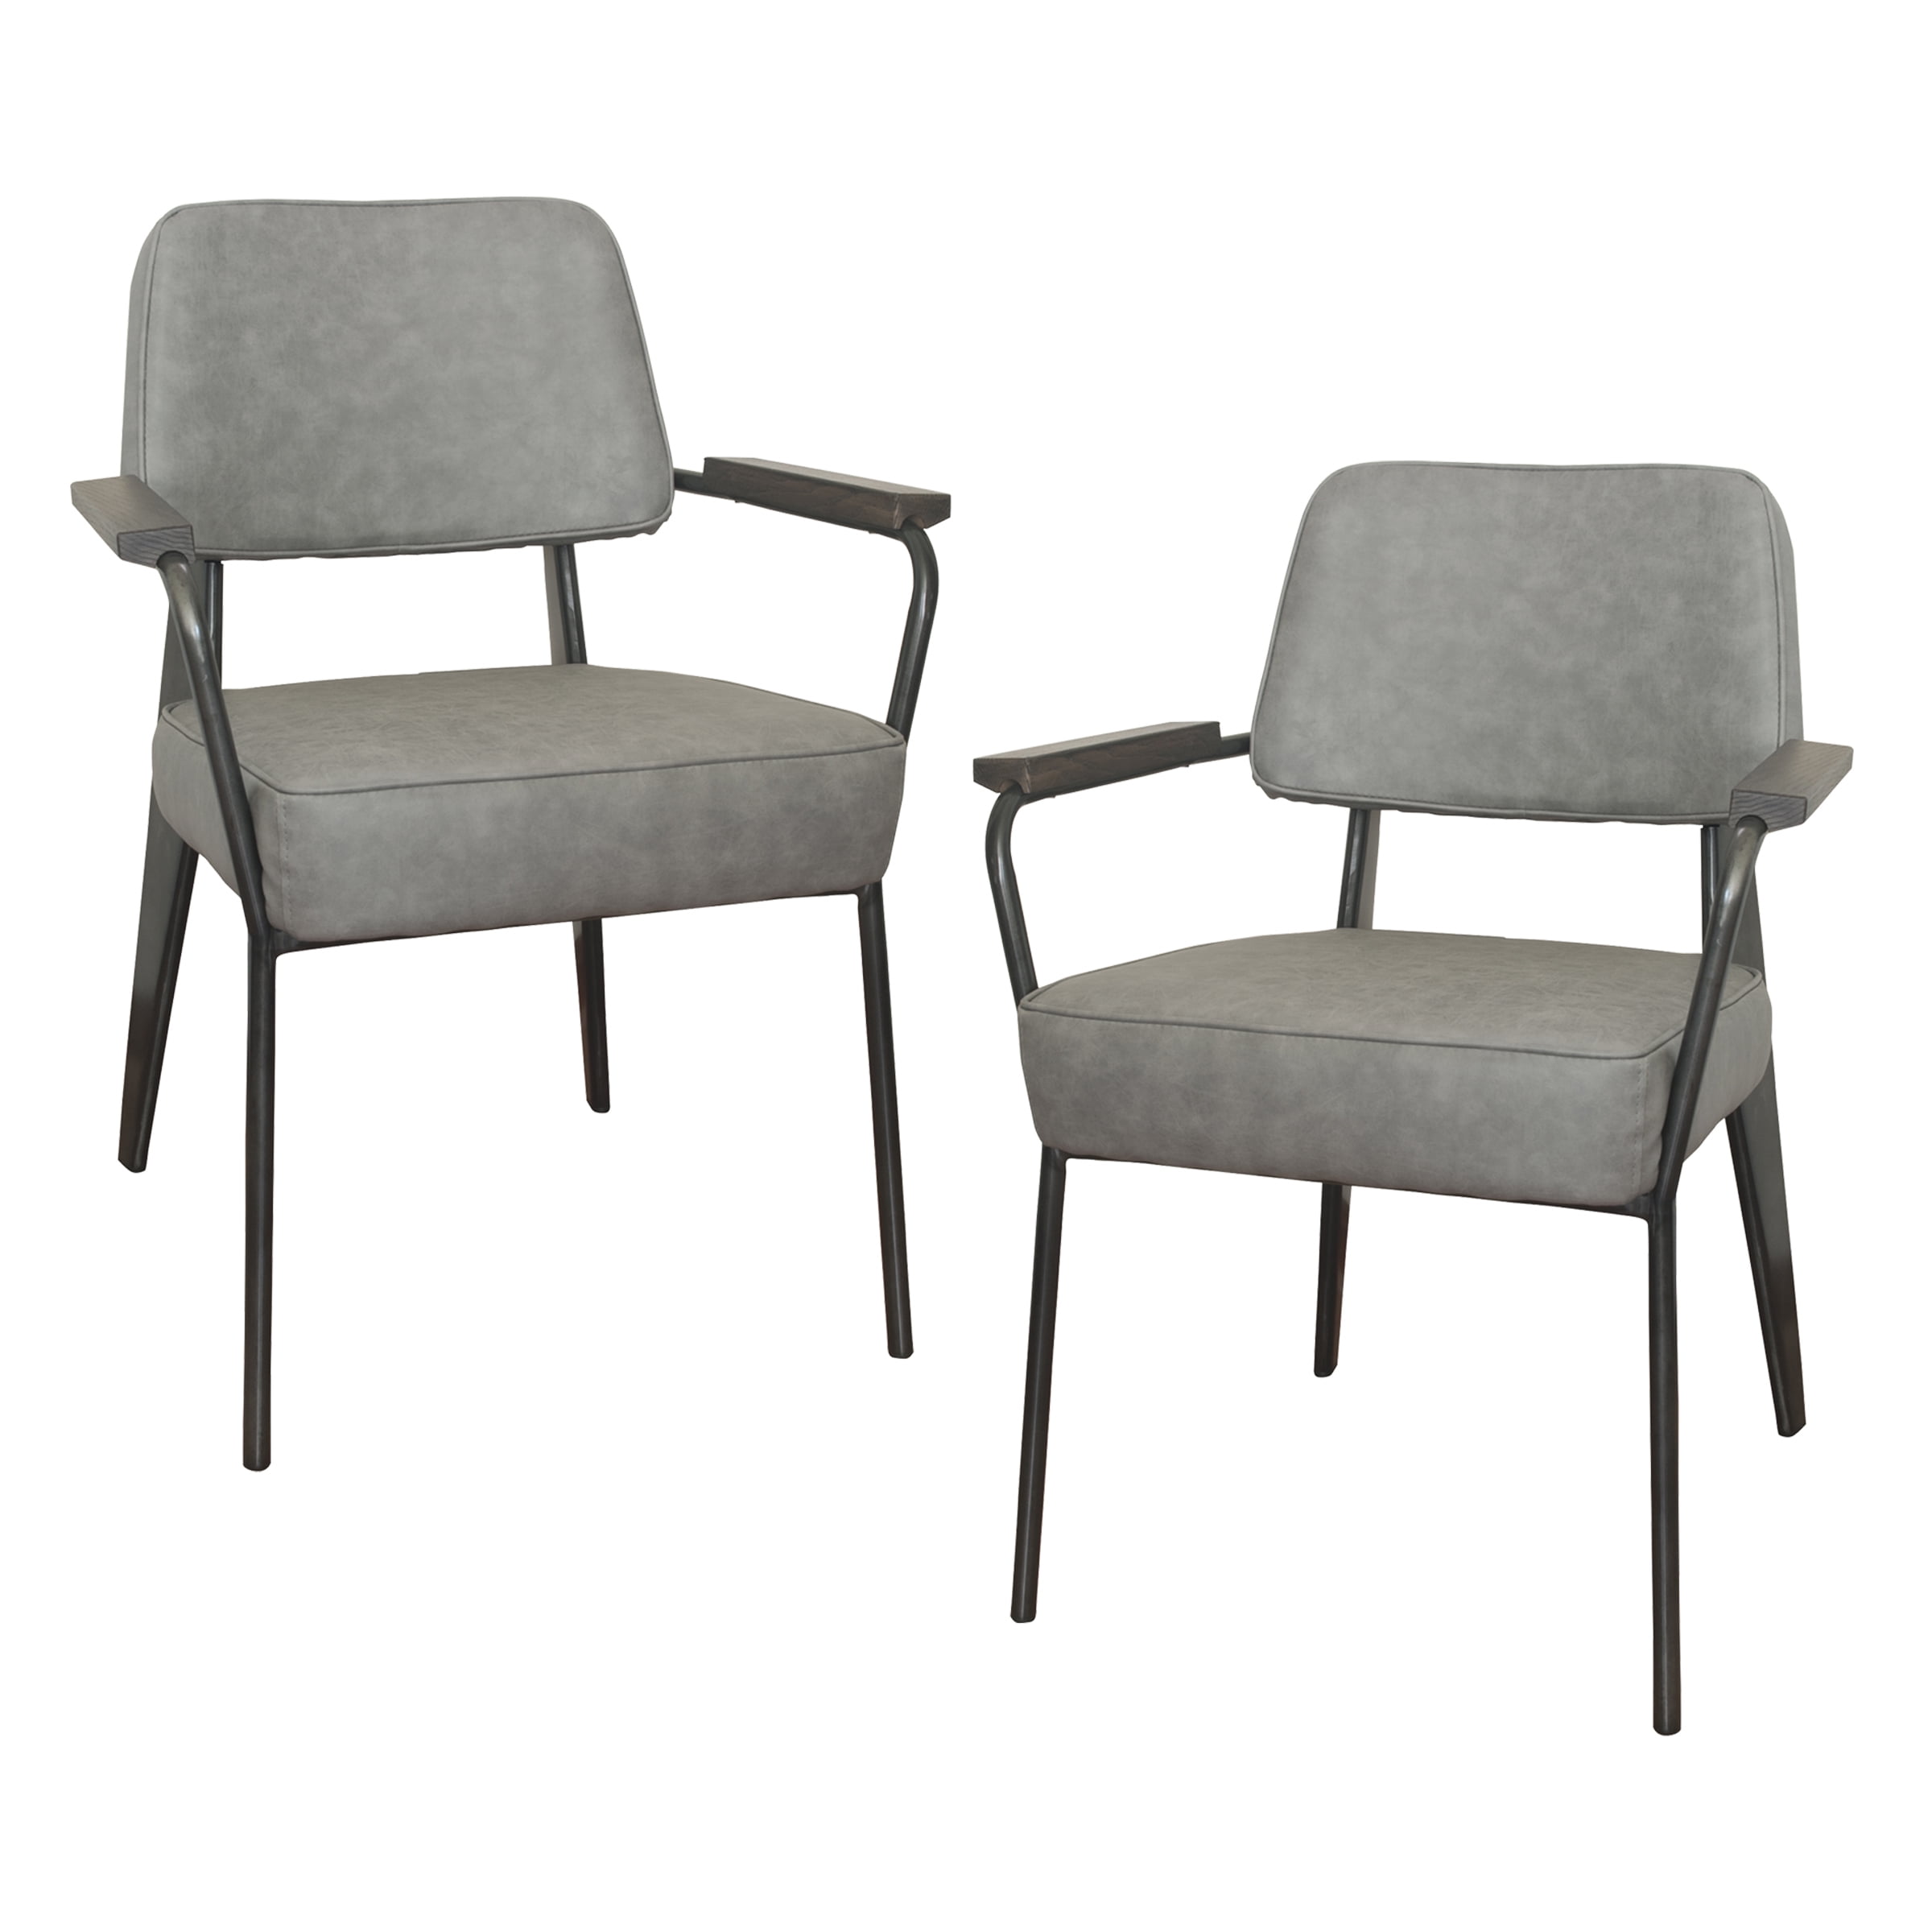 Fdchair2pcg Fauteuil Direction Accent Chair Set, Gray - 2 Piece